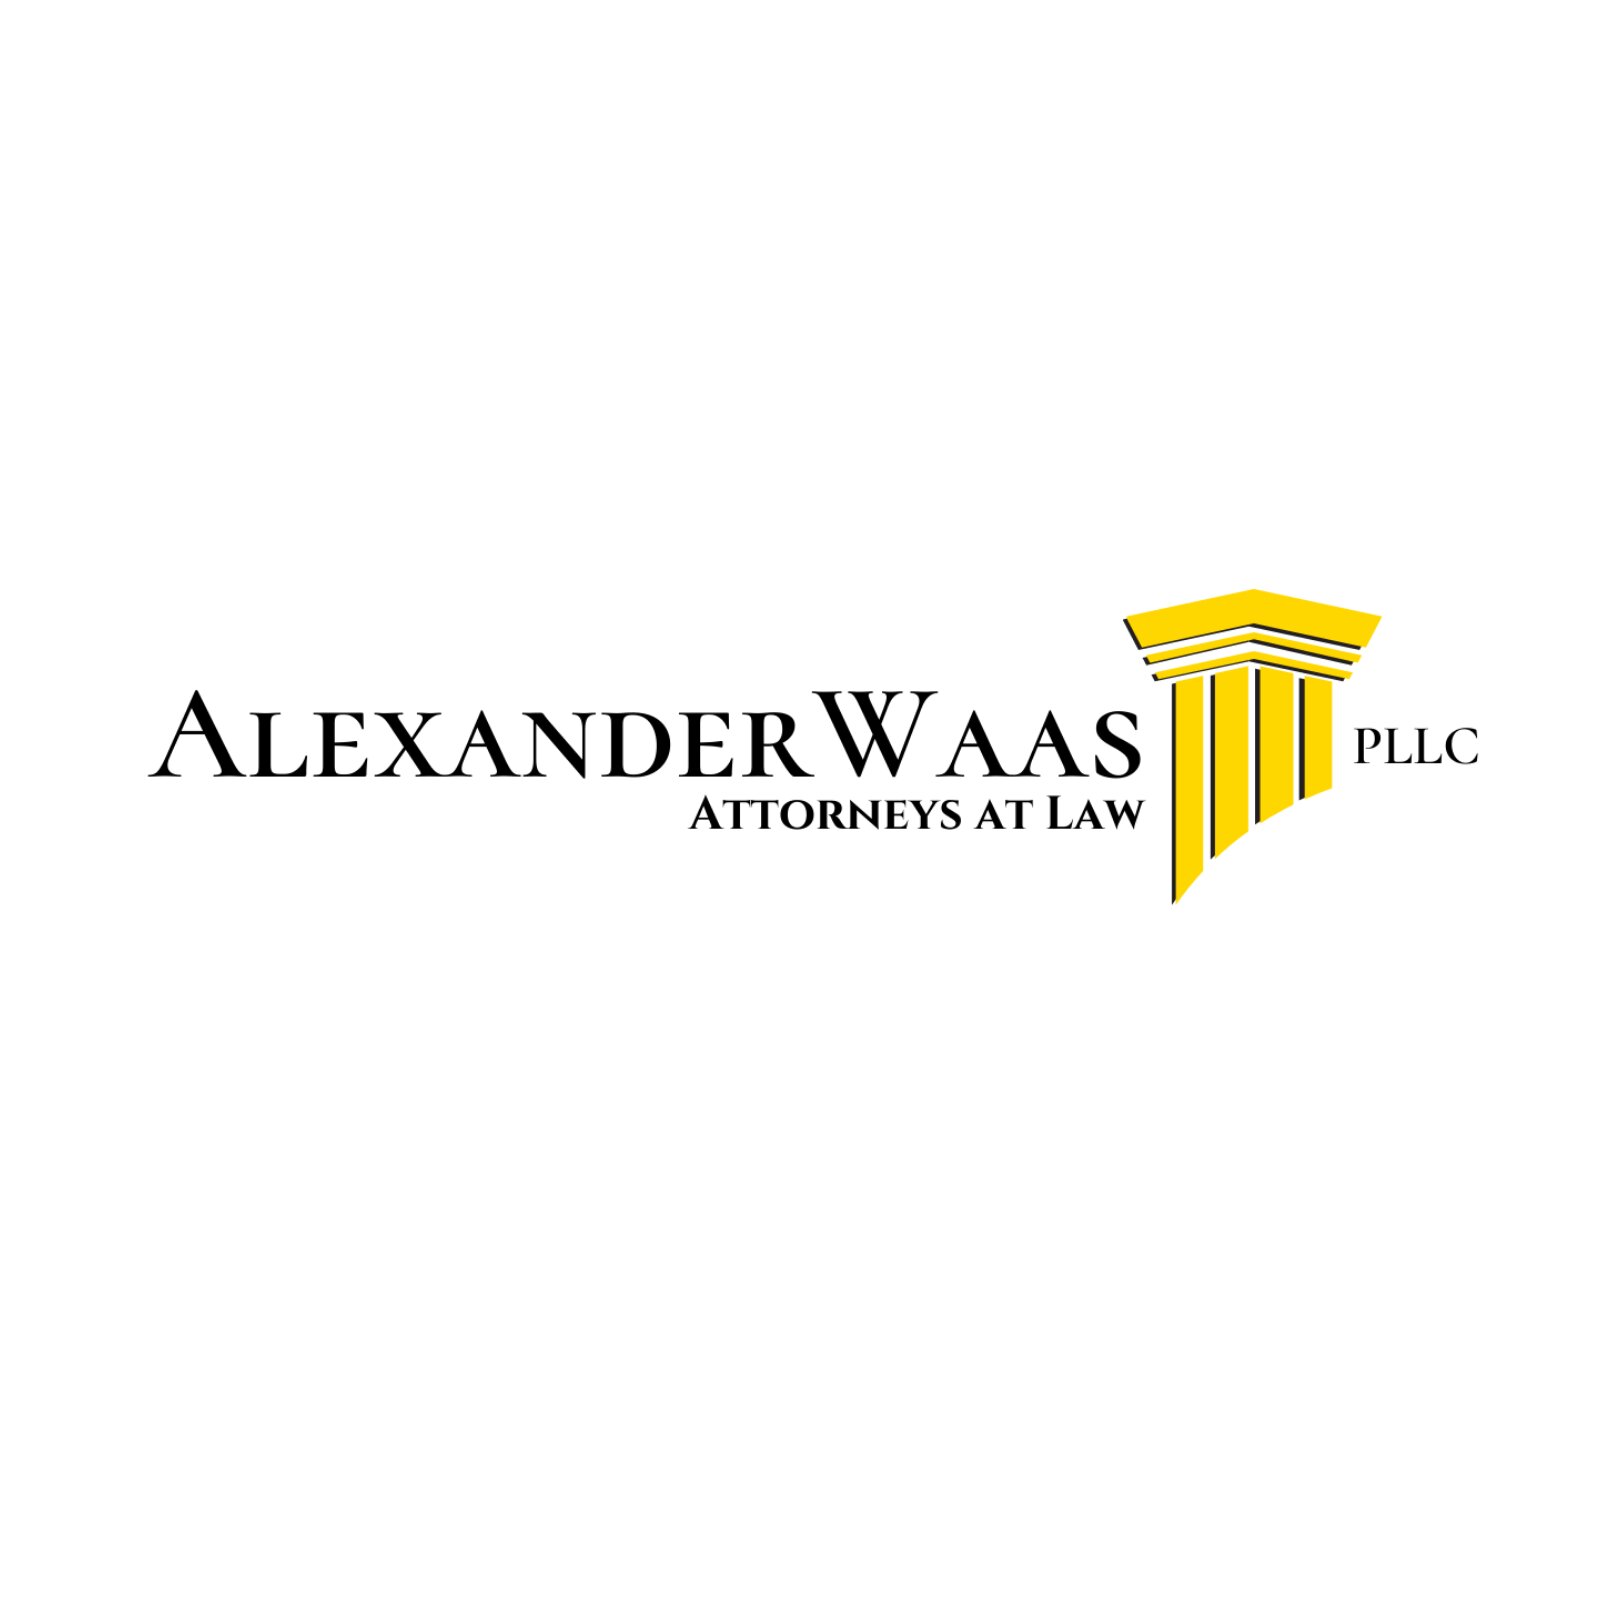 Alexander Waas Attorneys at Law, PLLC cover photo